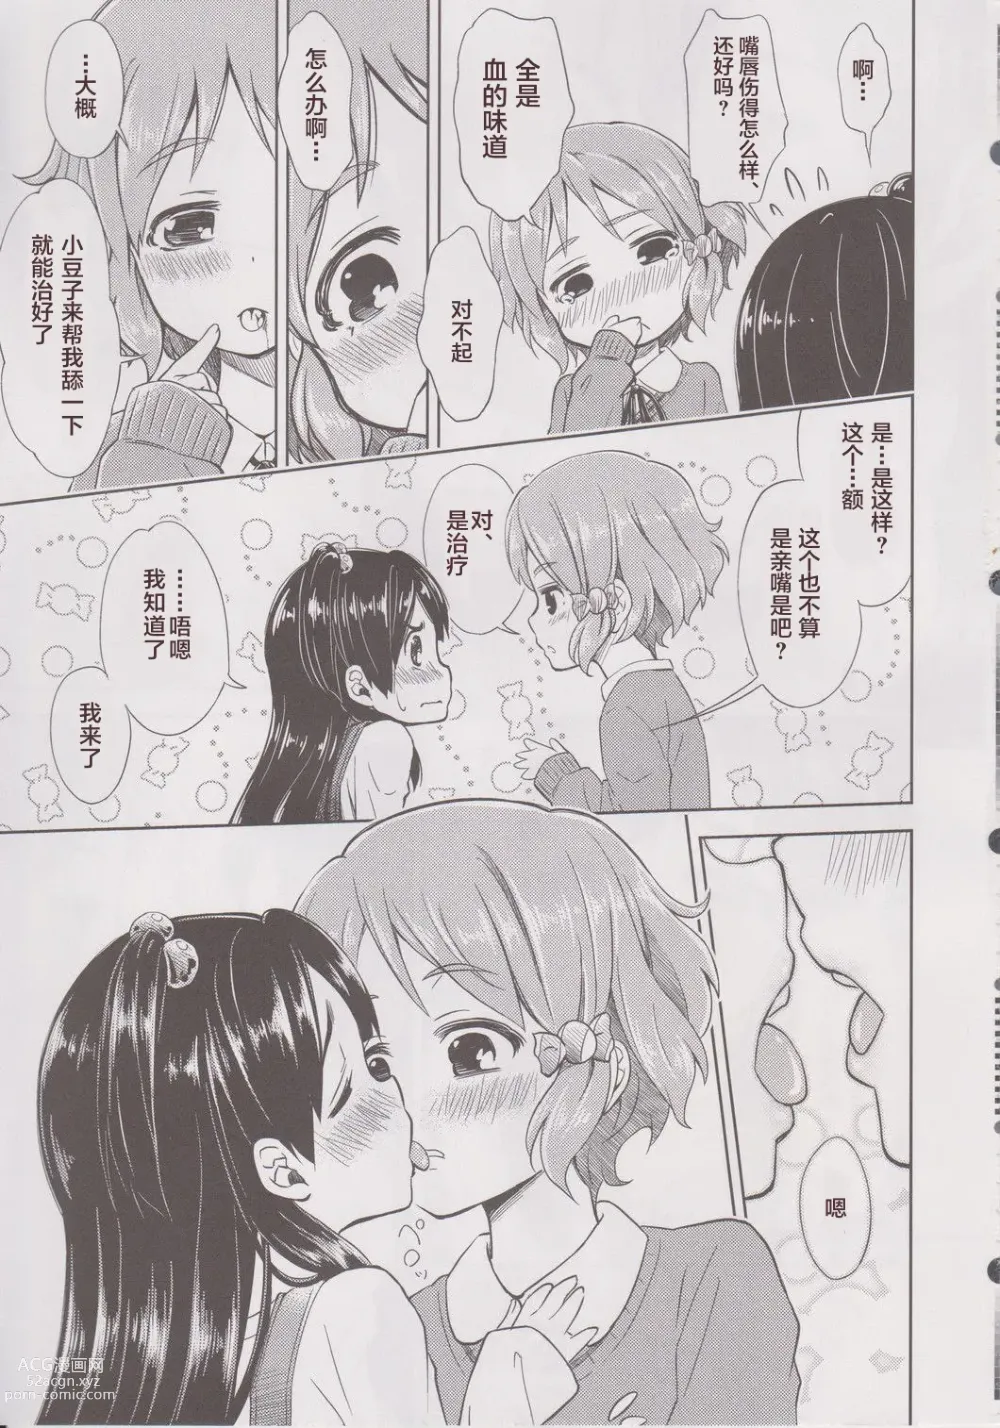 Page 10 of doujinshi Lovely Girls Lily vol. 6